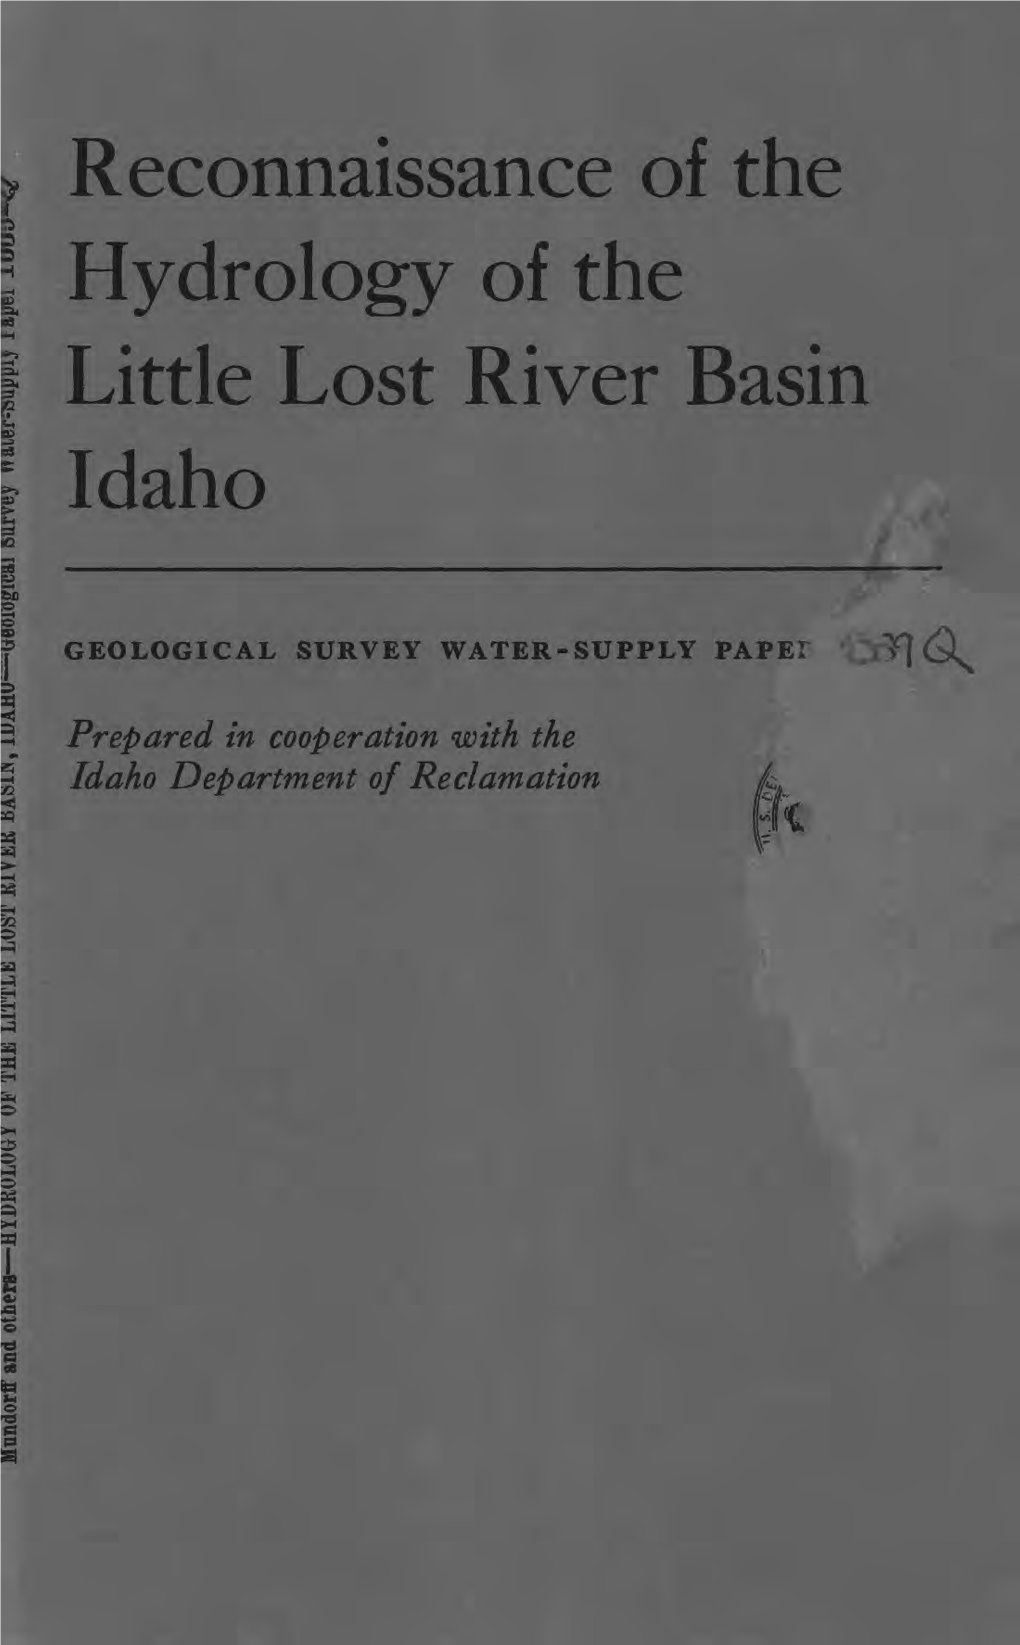 Reconnaissance of the Hydrology of the Little Lost River Basin Idaho